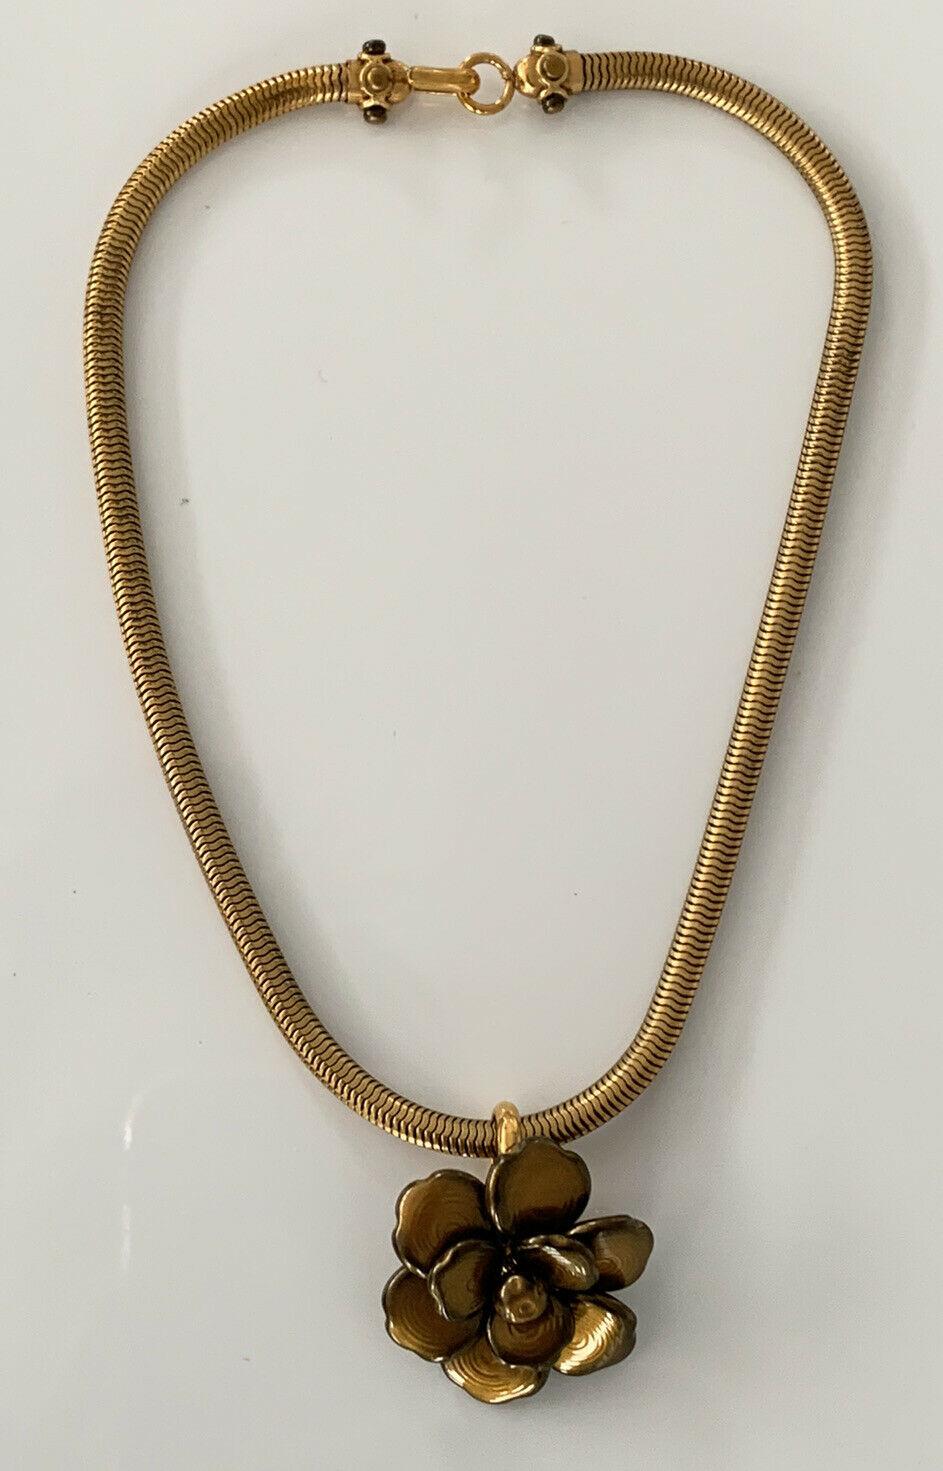 Chanel Camellia Necklace 38g



For sale is a beautiful Chanel Camellia necklace

Very elegant for everyday wear !! 

The necklace is 15.5 inches in length 

The pendant is approx 1 1/2 inches

The necklace weighs 38 grams
